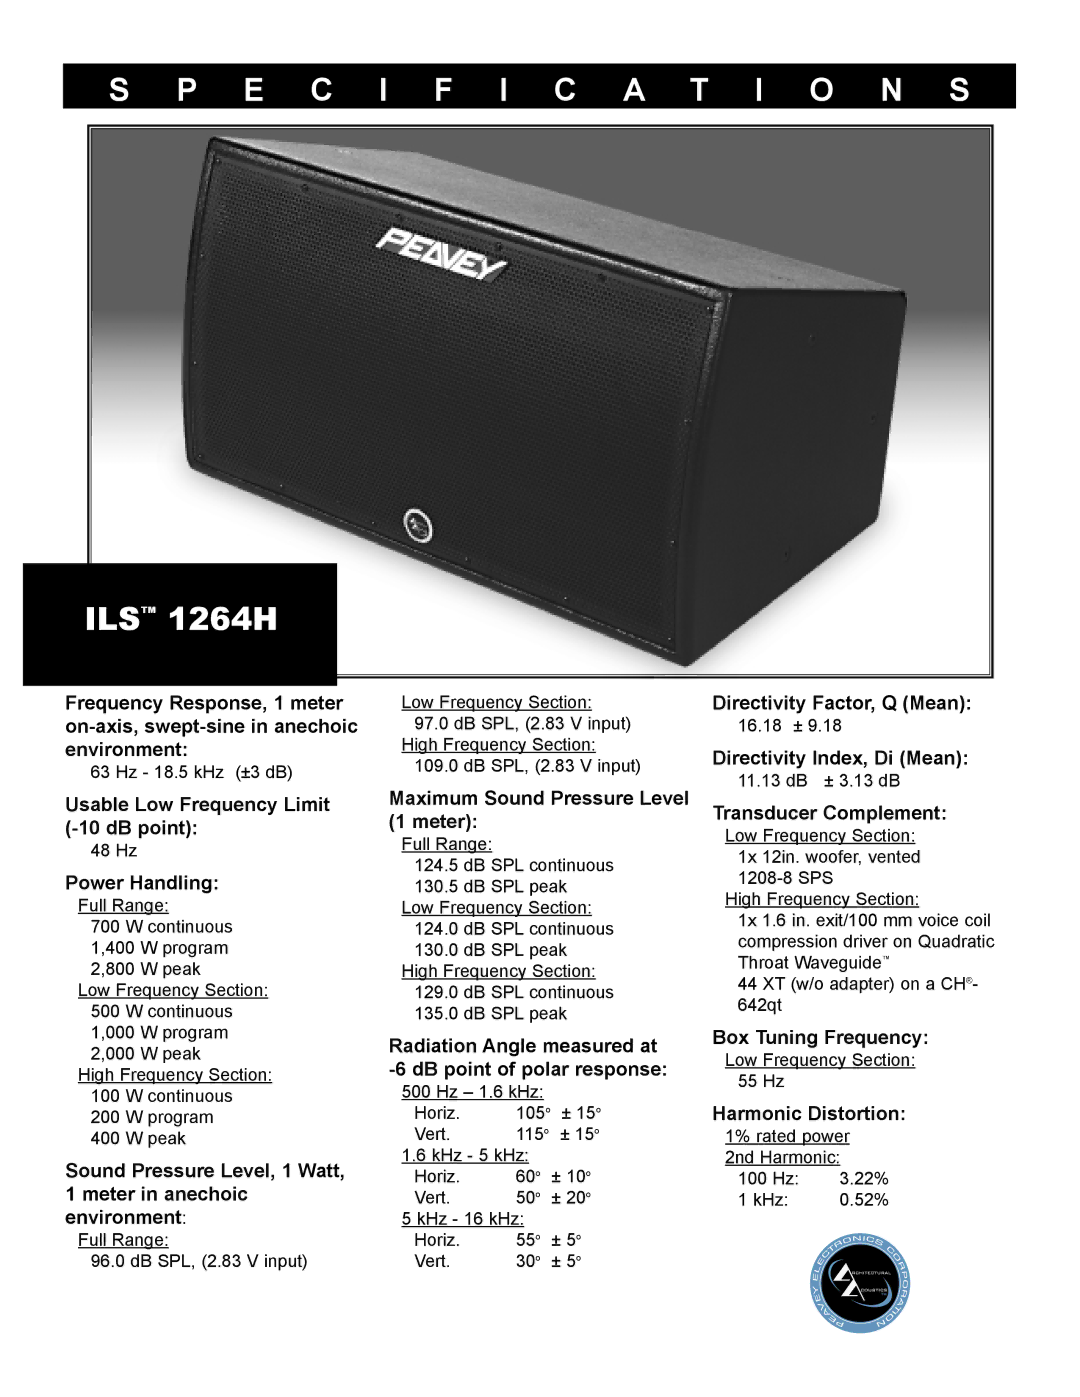 Peavey 1264 H specifications Usable Low Frequency Limit -10 dB point, Power Handling, Maximum Sound Pressure Level 1 meter 